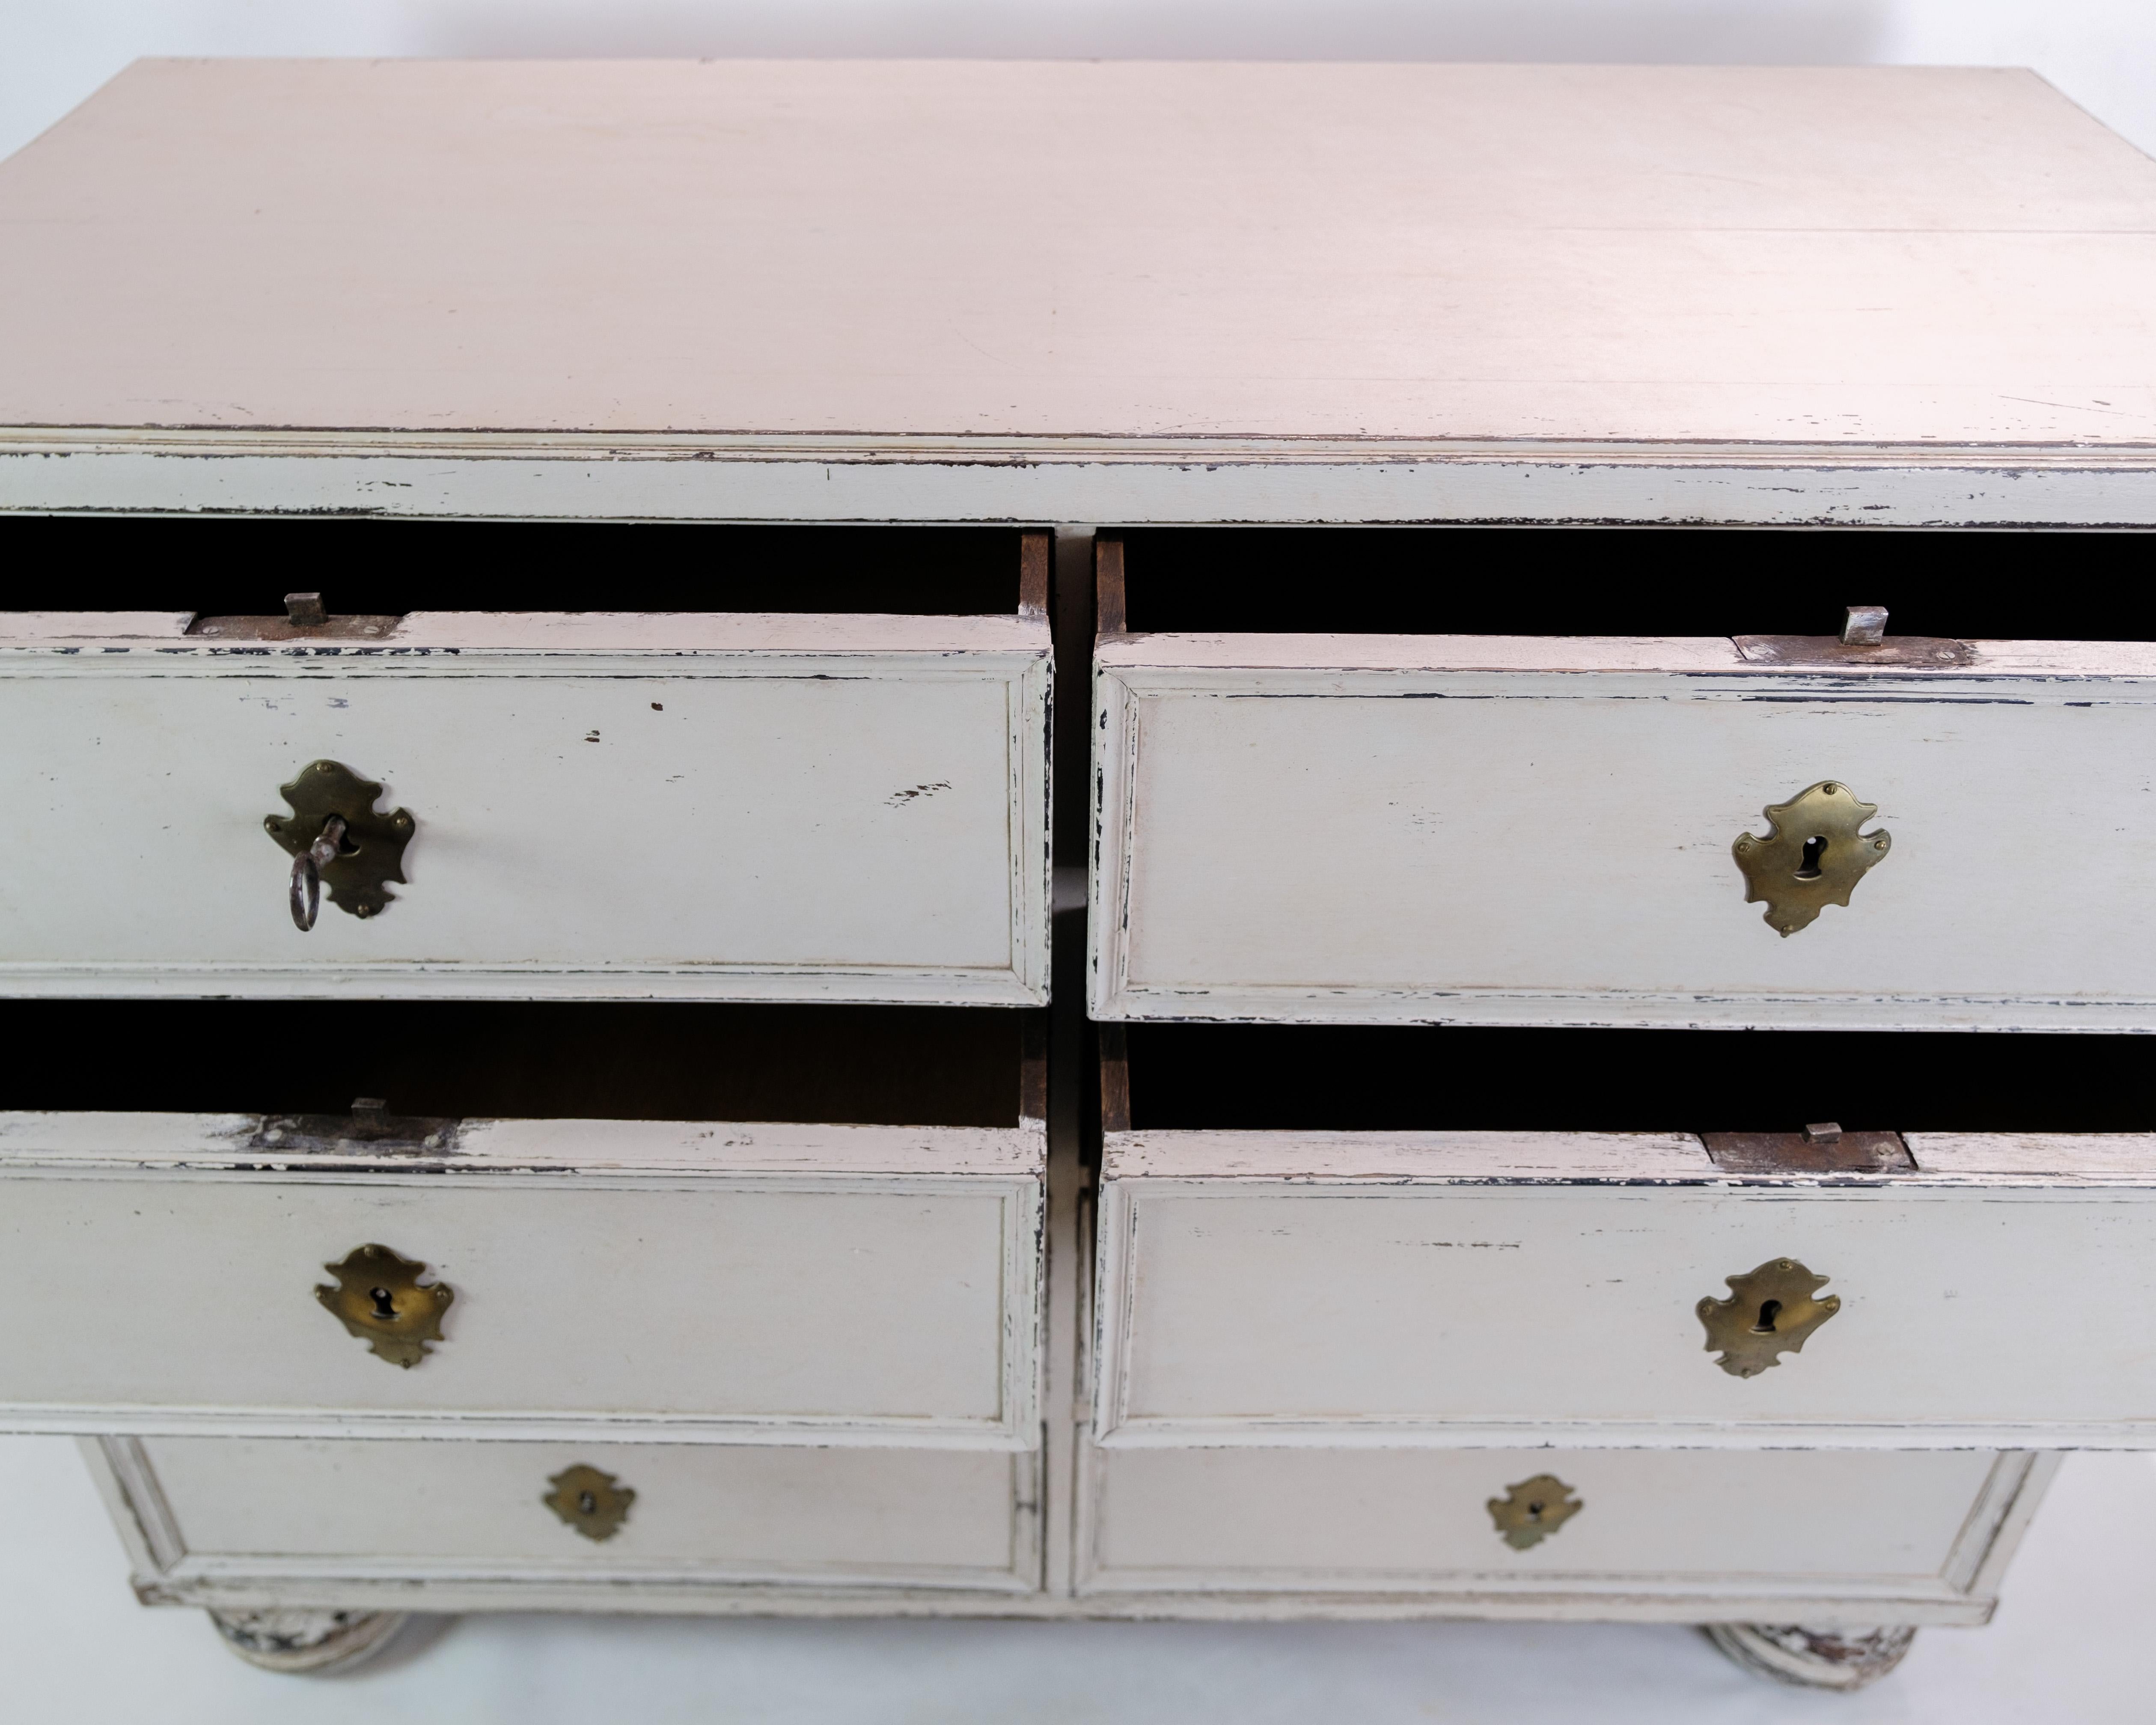 Dive into the past with this Swedish chest of drawers in the enchanting Gustavian style from around the 1780s. The subtle design, characterized by the simple elegance of the period, creates an atmosphere of historical sophistication. Every curve and